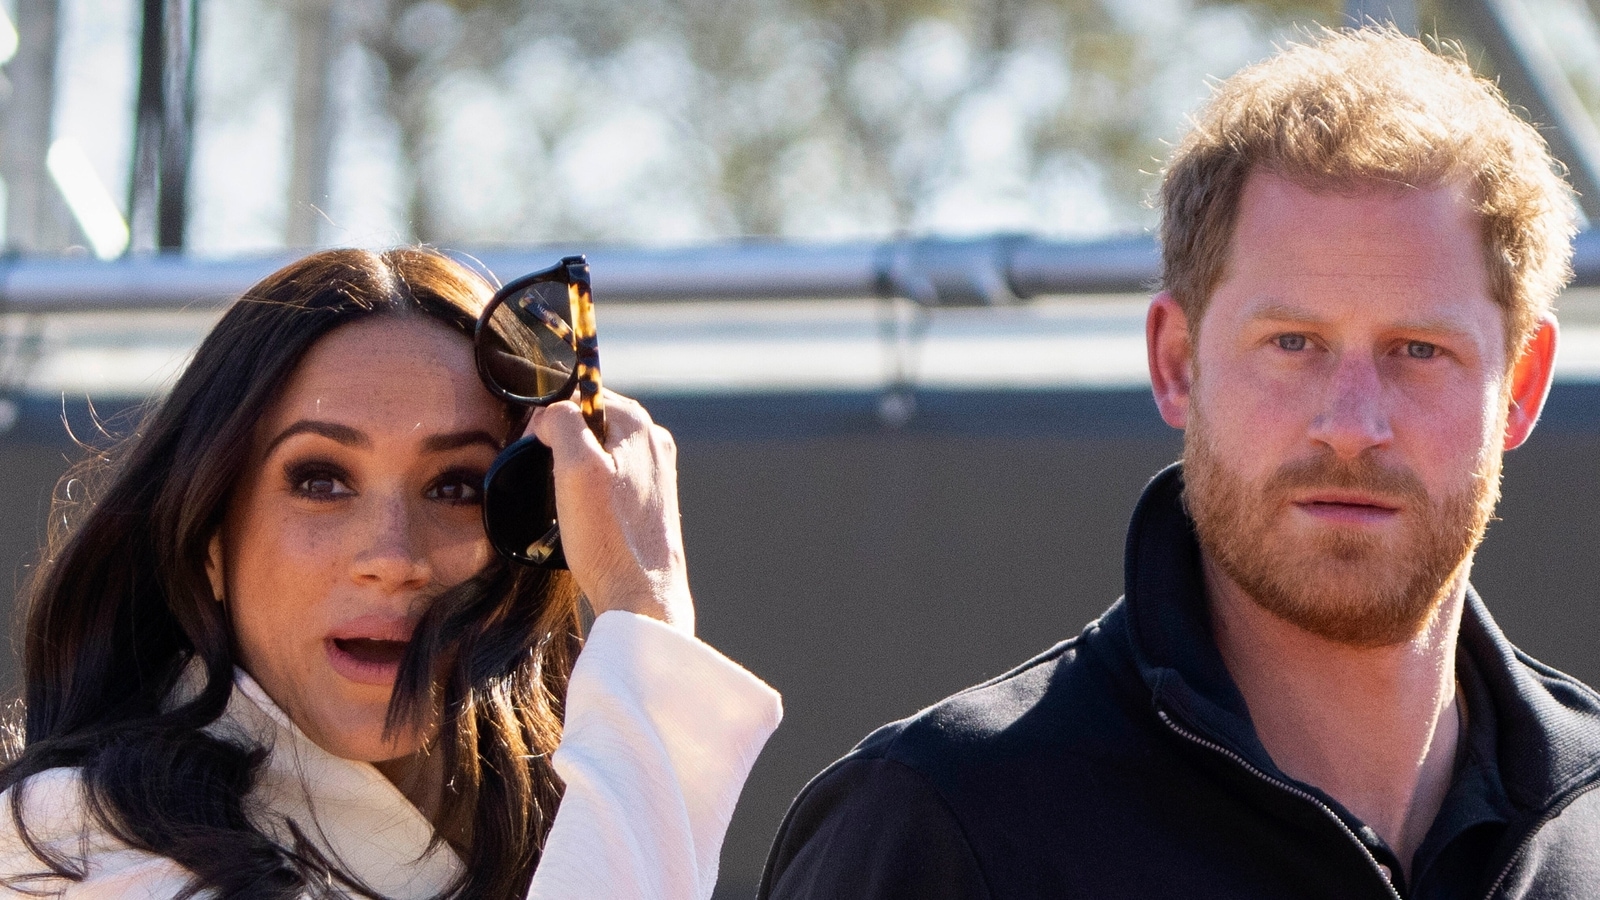 Prince Harry, Meghan Markle cancelled party at the last minute after